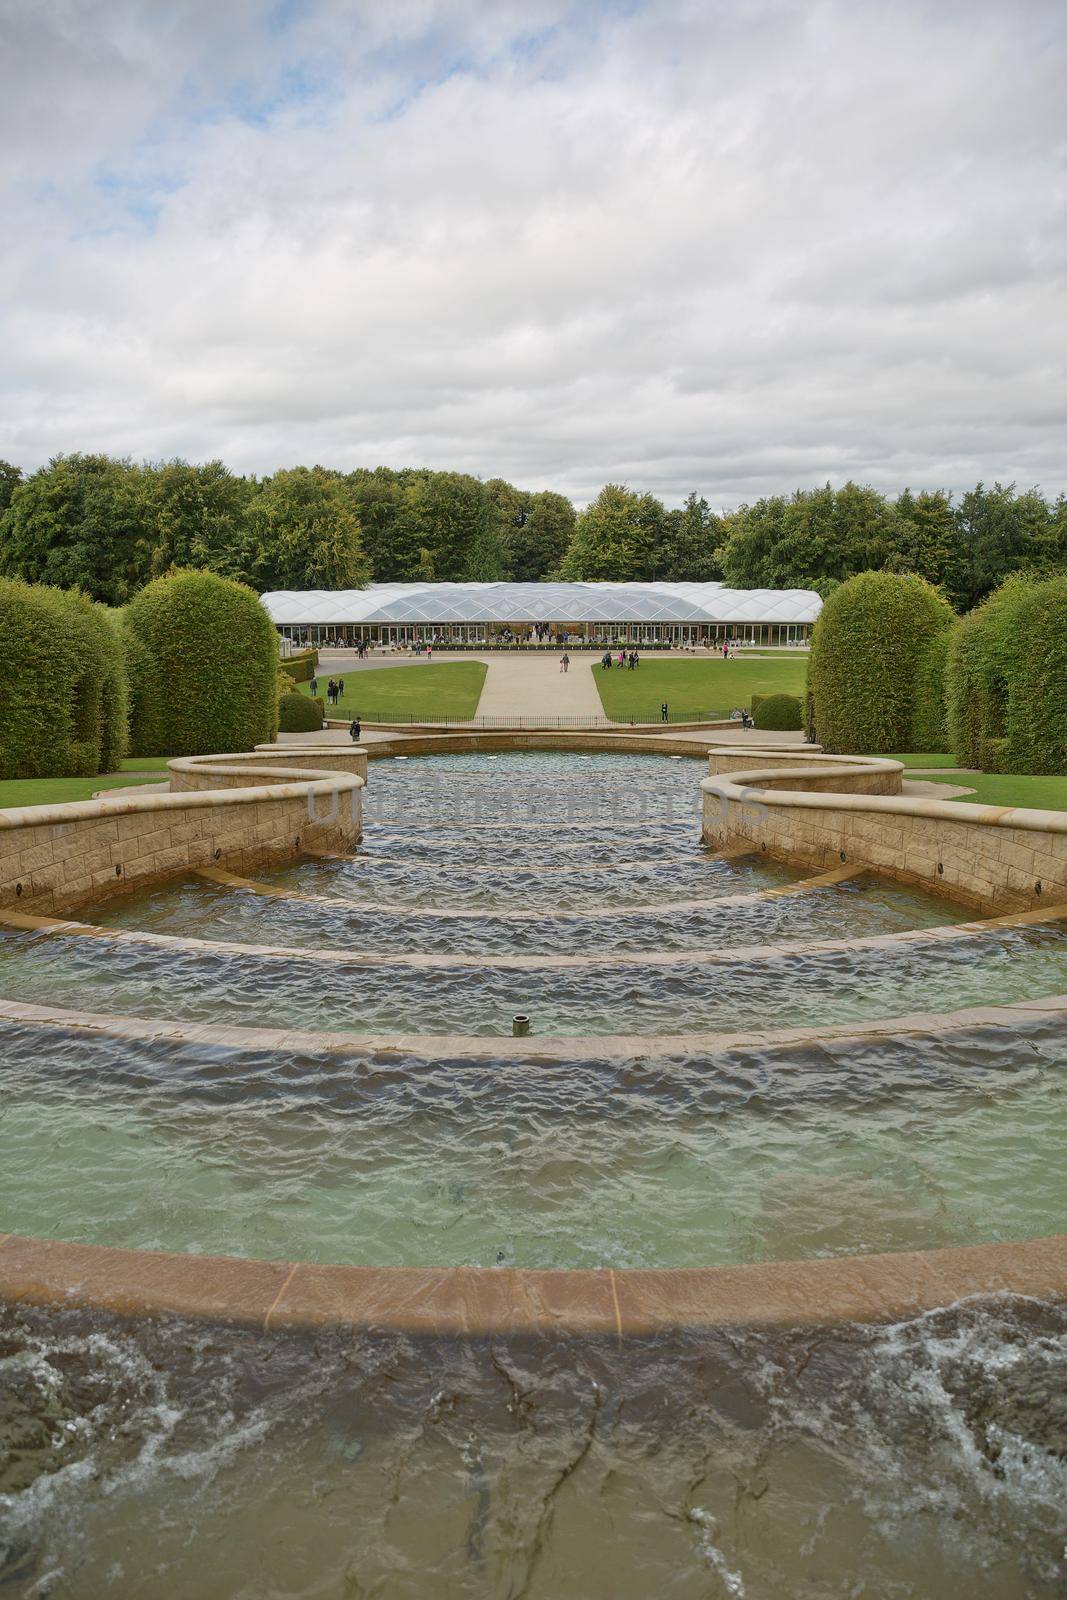 Alnwick Garden - a contemporary pleasure gardens adjacent to Alnwick Castle in Northumberland county in the UK by wondry